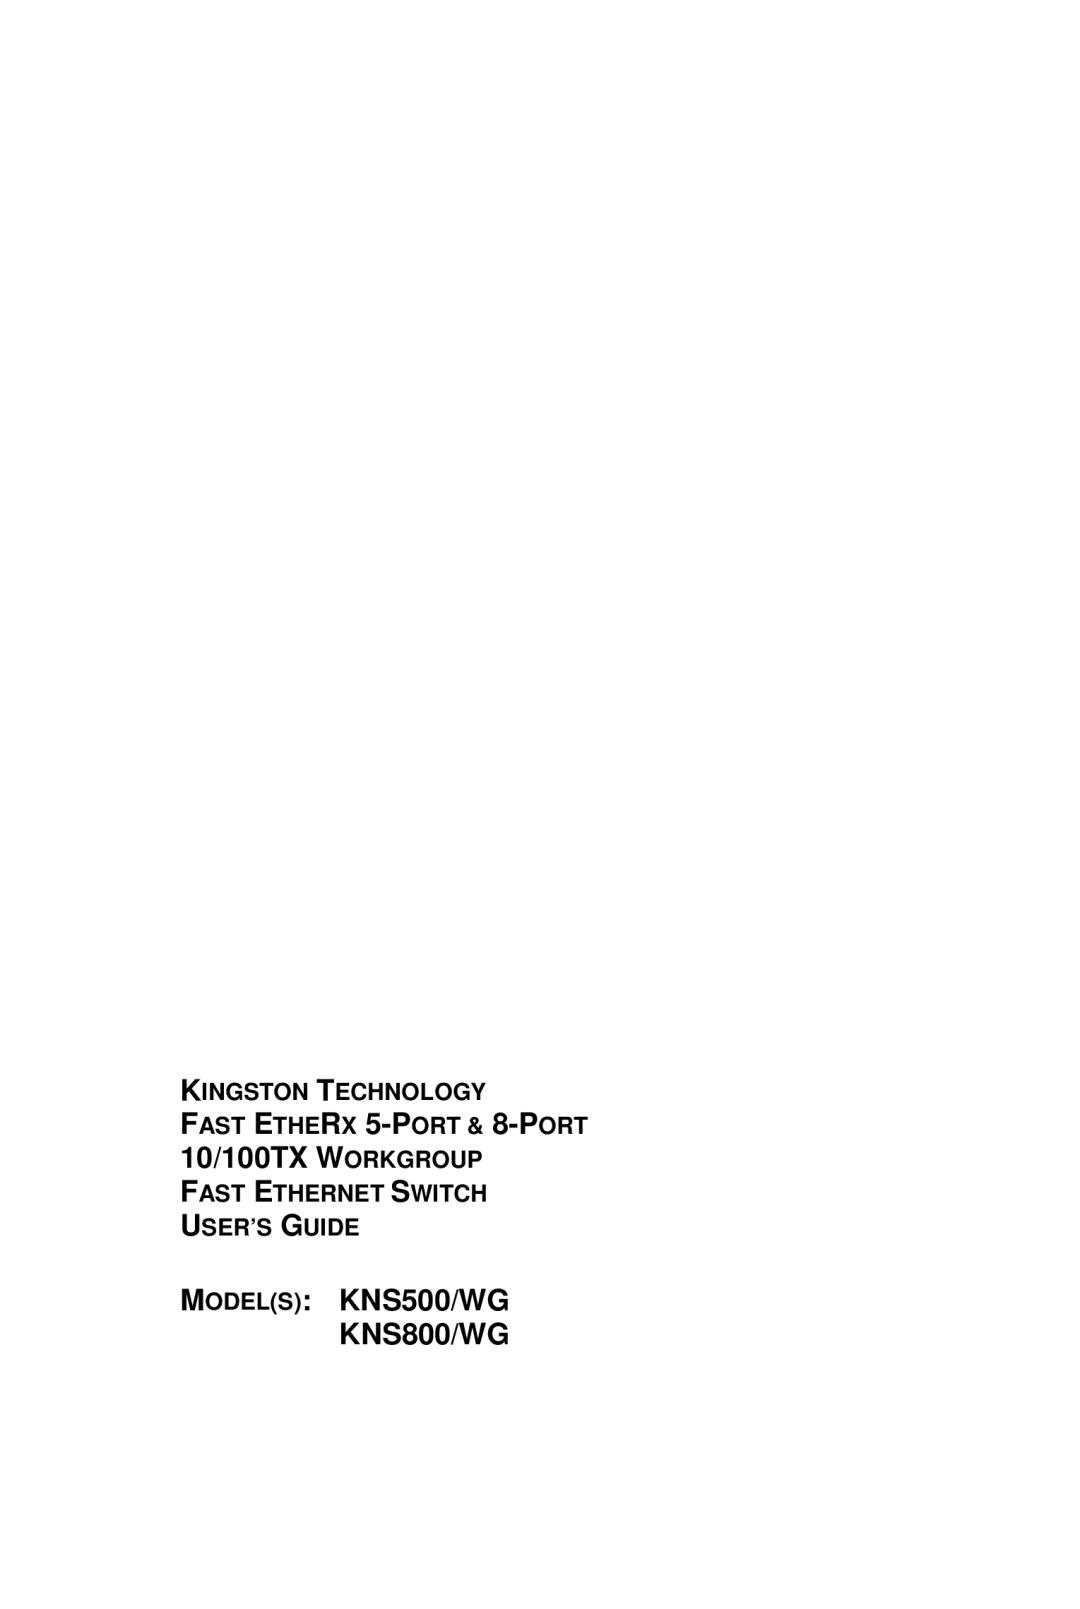 Kingston Technology manual 10/100TX WORKGROUP, MODELS KNS500/WG KNS800/WG, Fast Ethernet Switch User’S Guide 